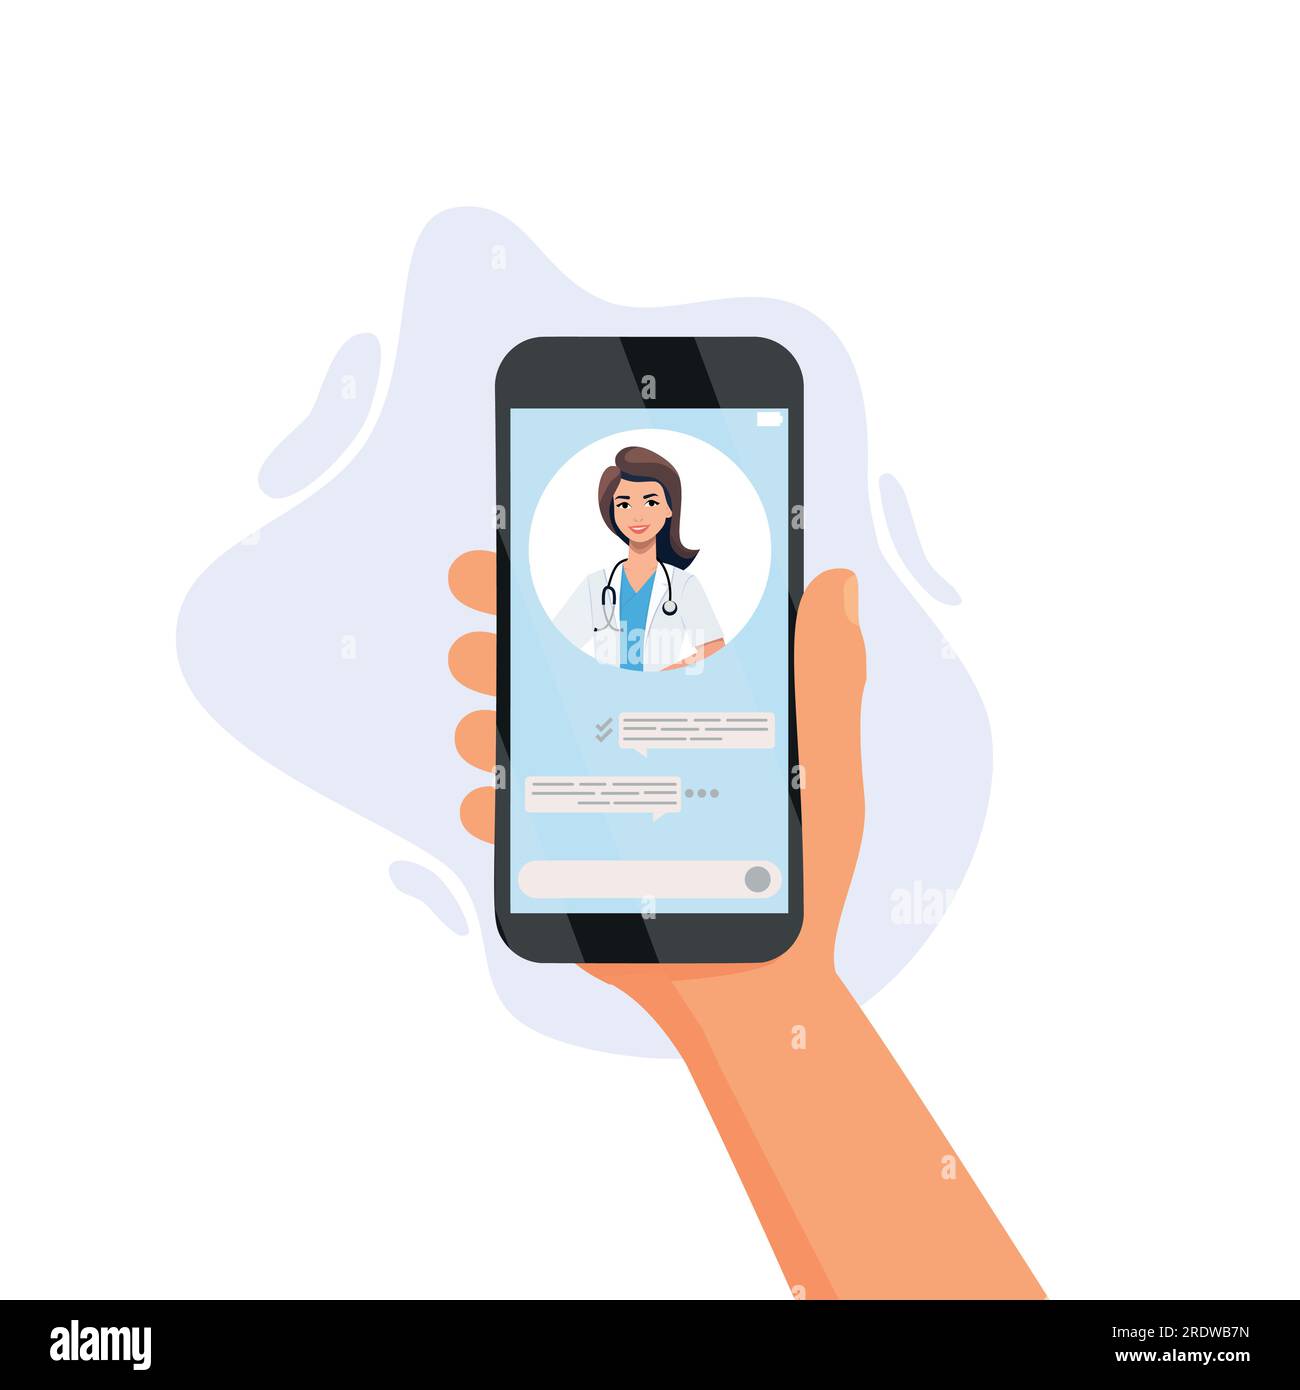 nline medicine concept vector illustration. Cartoon flat human hand holding smartphone with video call to doctor character on screen, using mobile adv Stock Vector